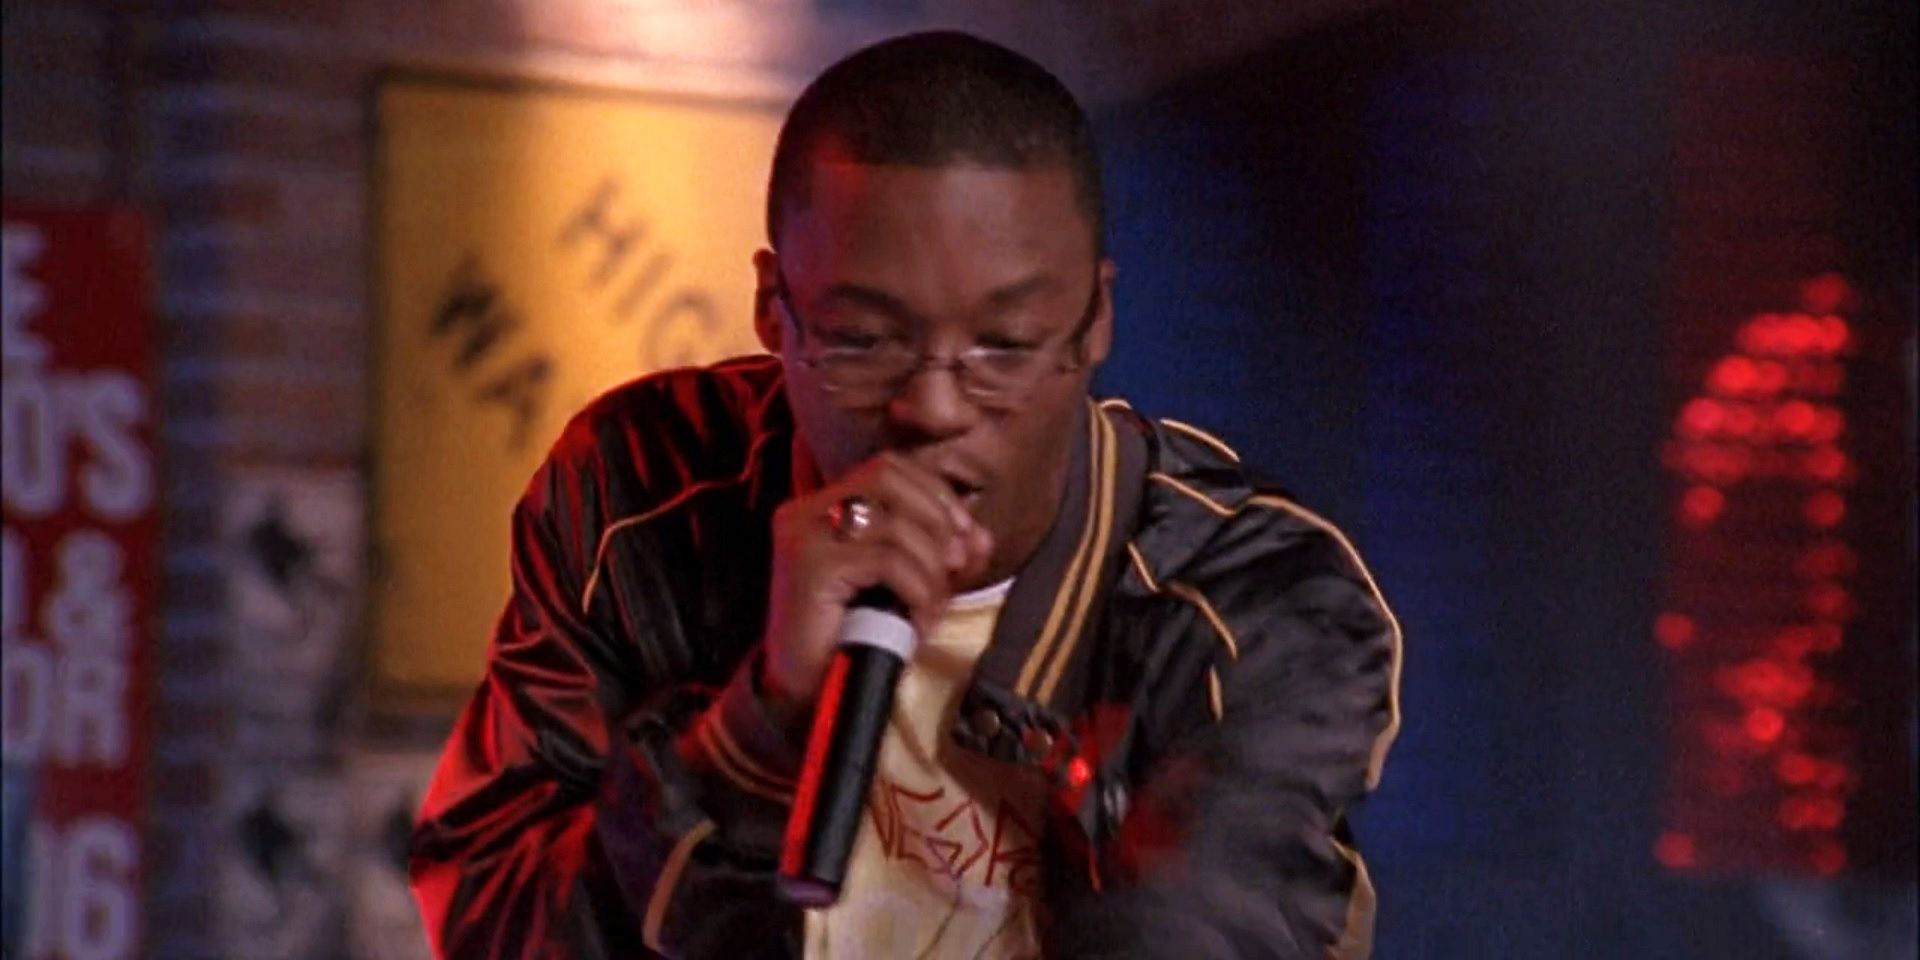 Lupe Fiasco in One Tree Hill.